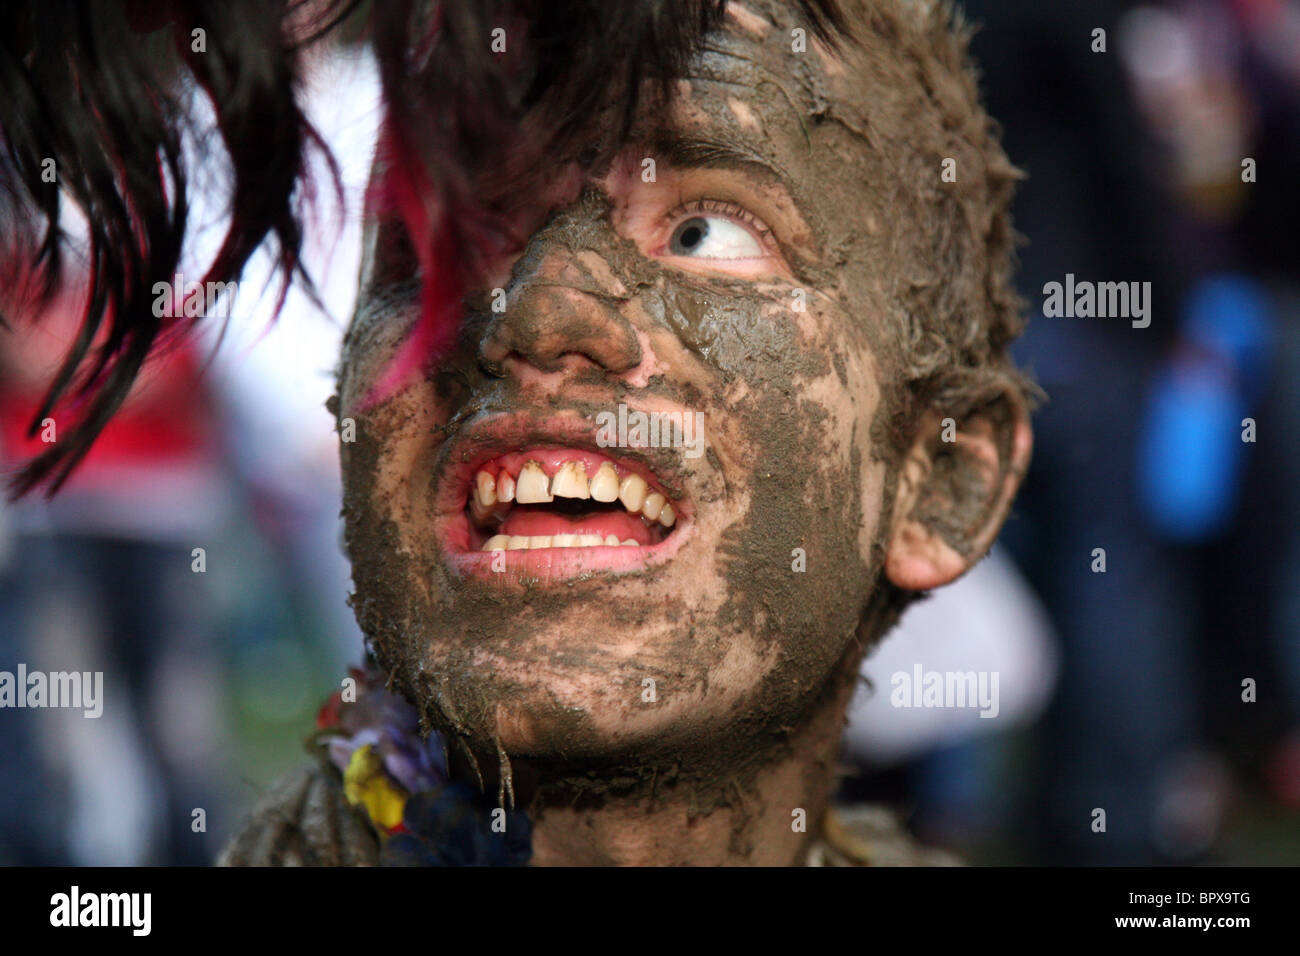 Man covered in mud at the Swindon Pride Event 2010 at the bowl in Town Gardens. Stock Photo